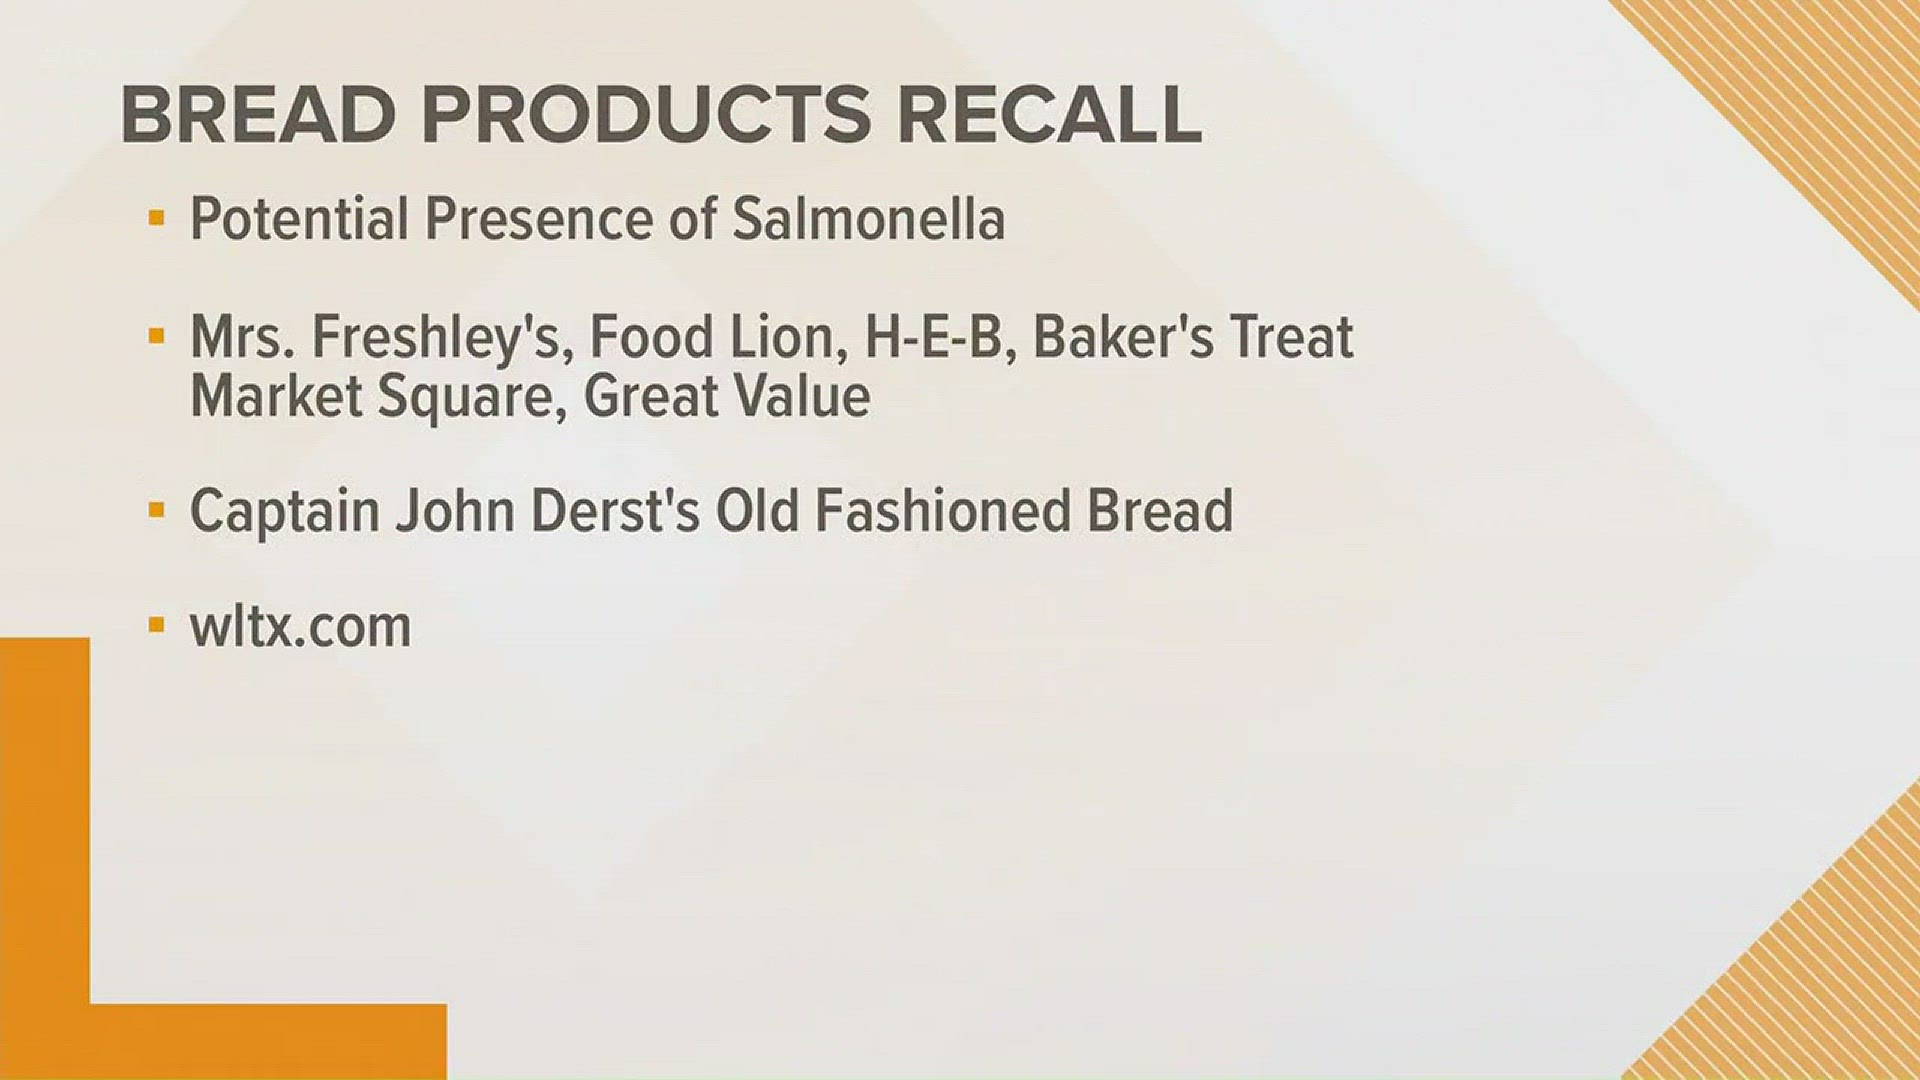 Concerns over salmonella has prompted Flowers Foods to issue a recall nationwide for Swiss rolls under several brand names.